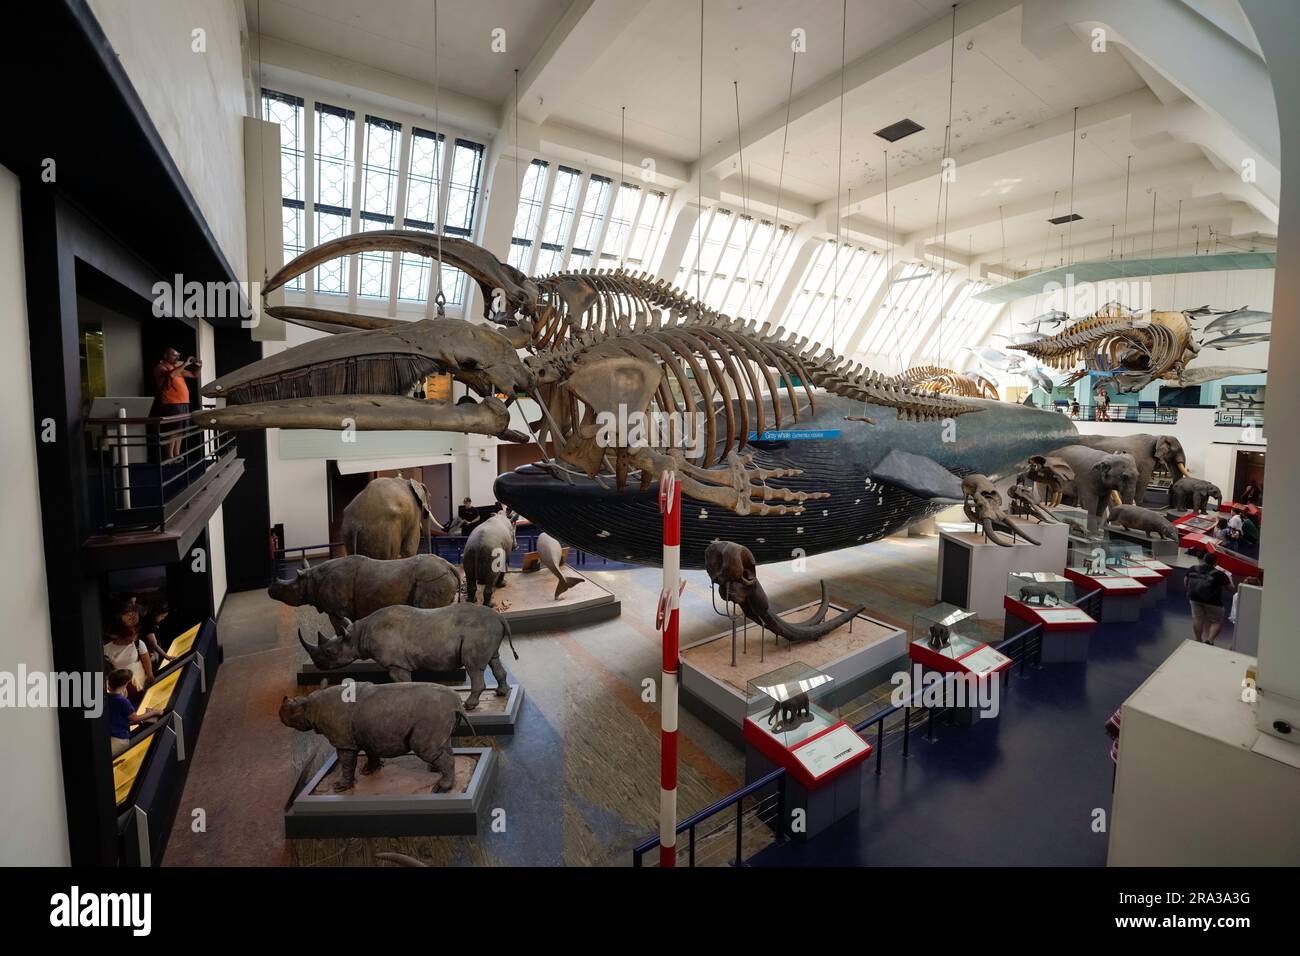 Natural History Museum in London, interior of museum. Museum gallery with exhibit showing skeletons and aquatic animals with educational displays. Stock Photo